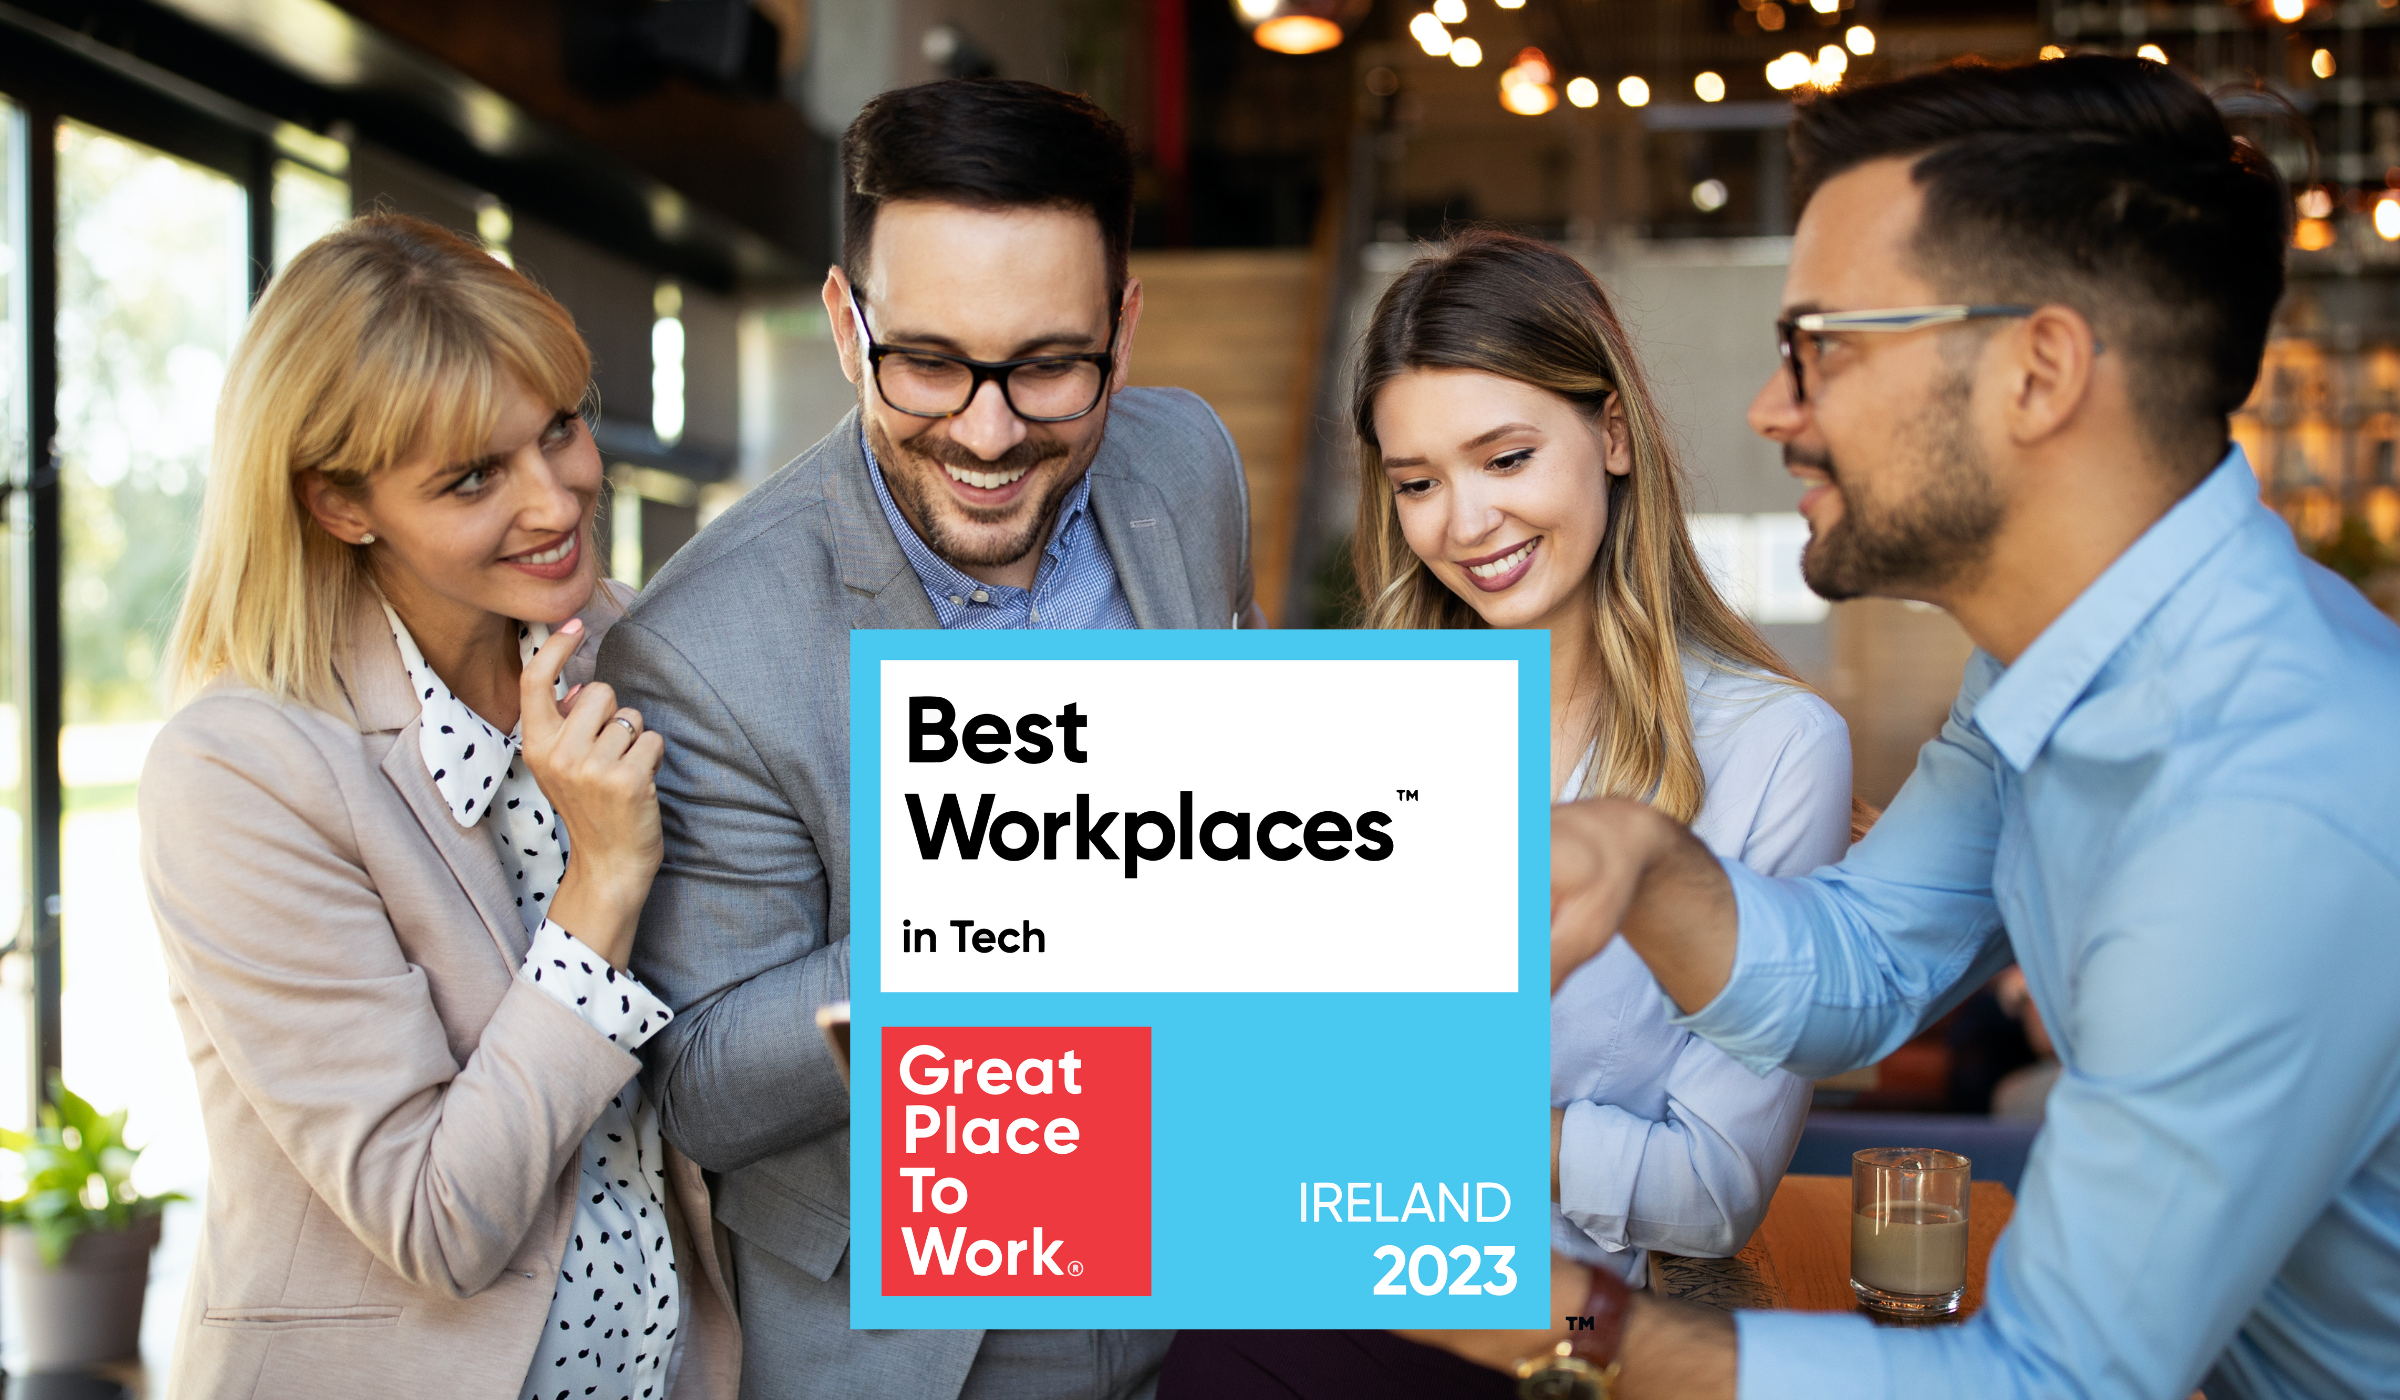 The Best Workplaces™ in Tech 2023 are revealed!